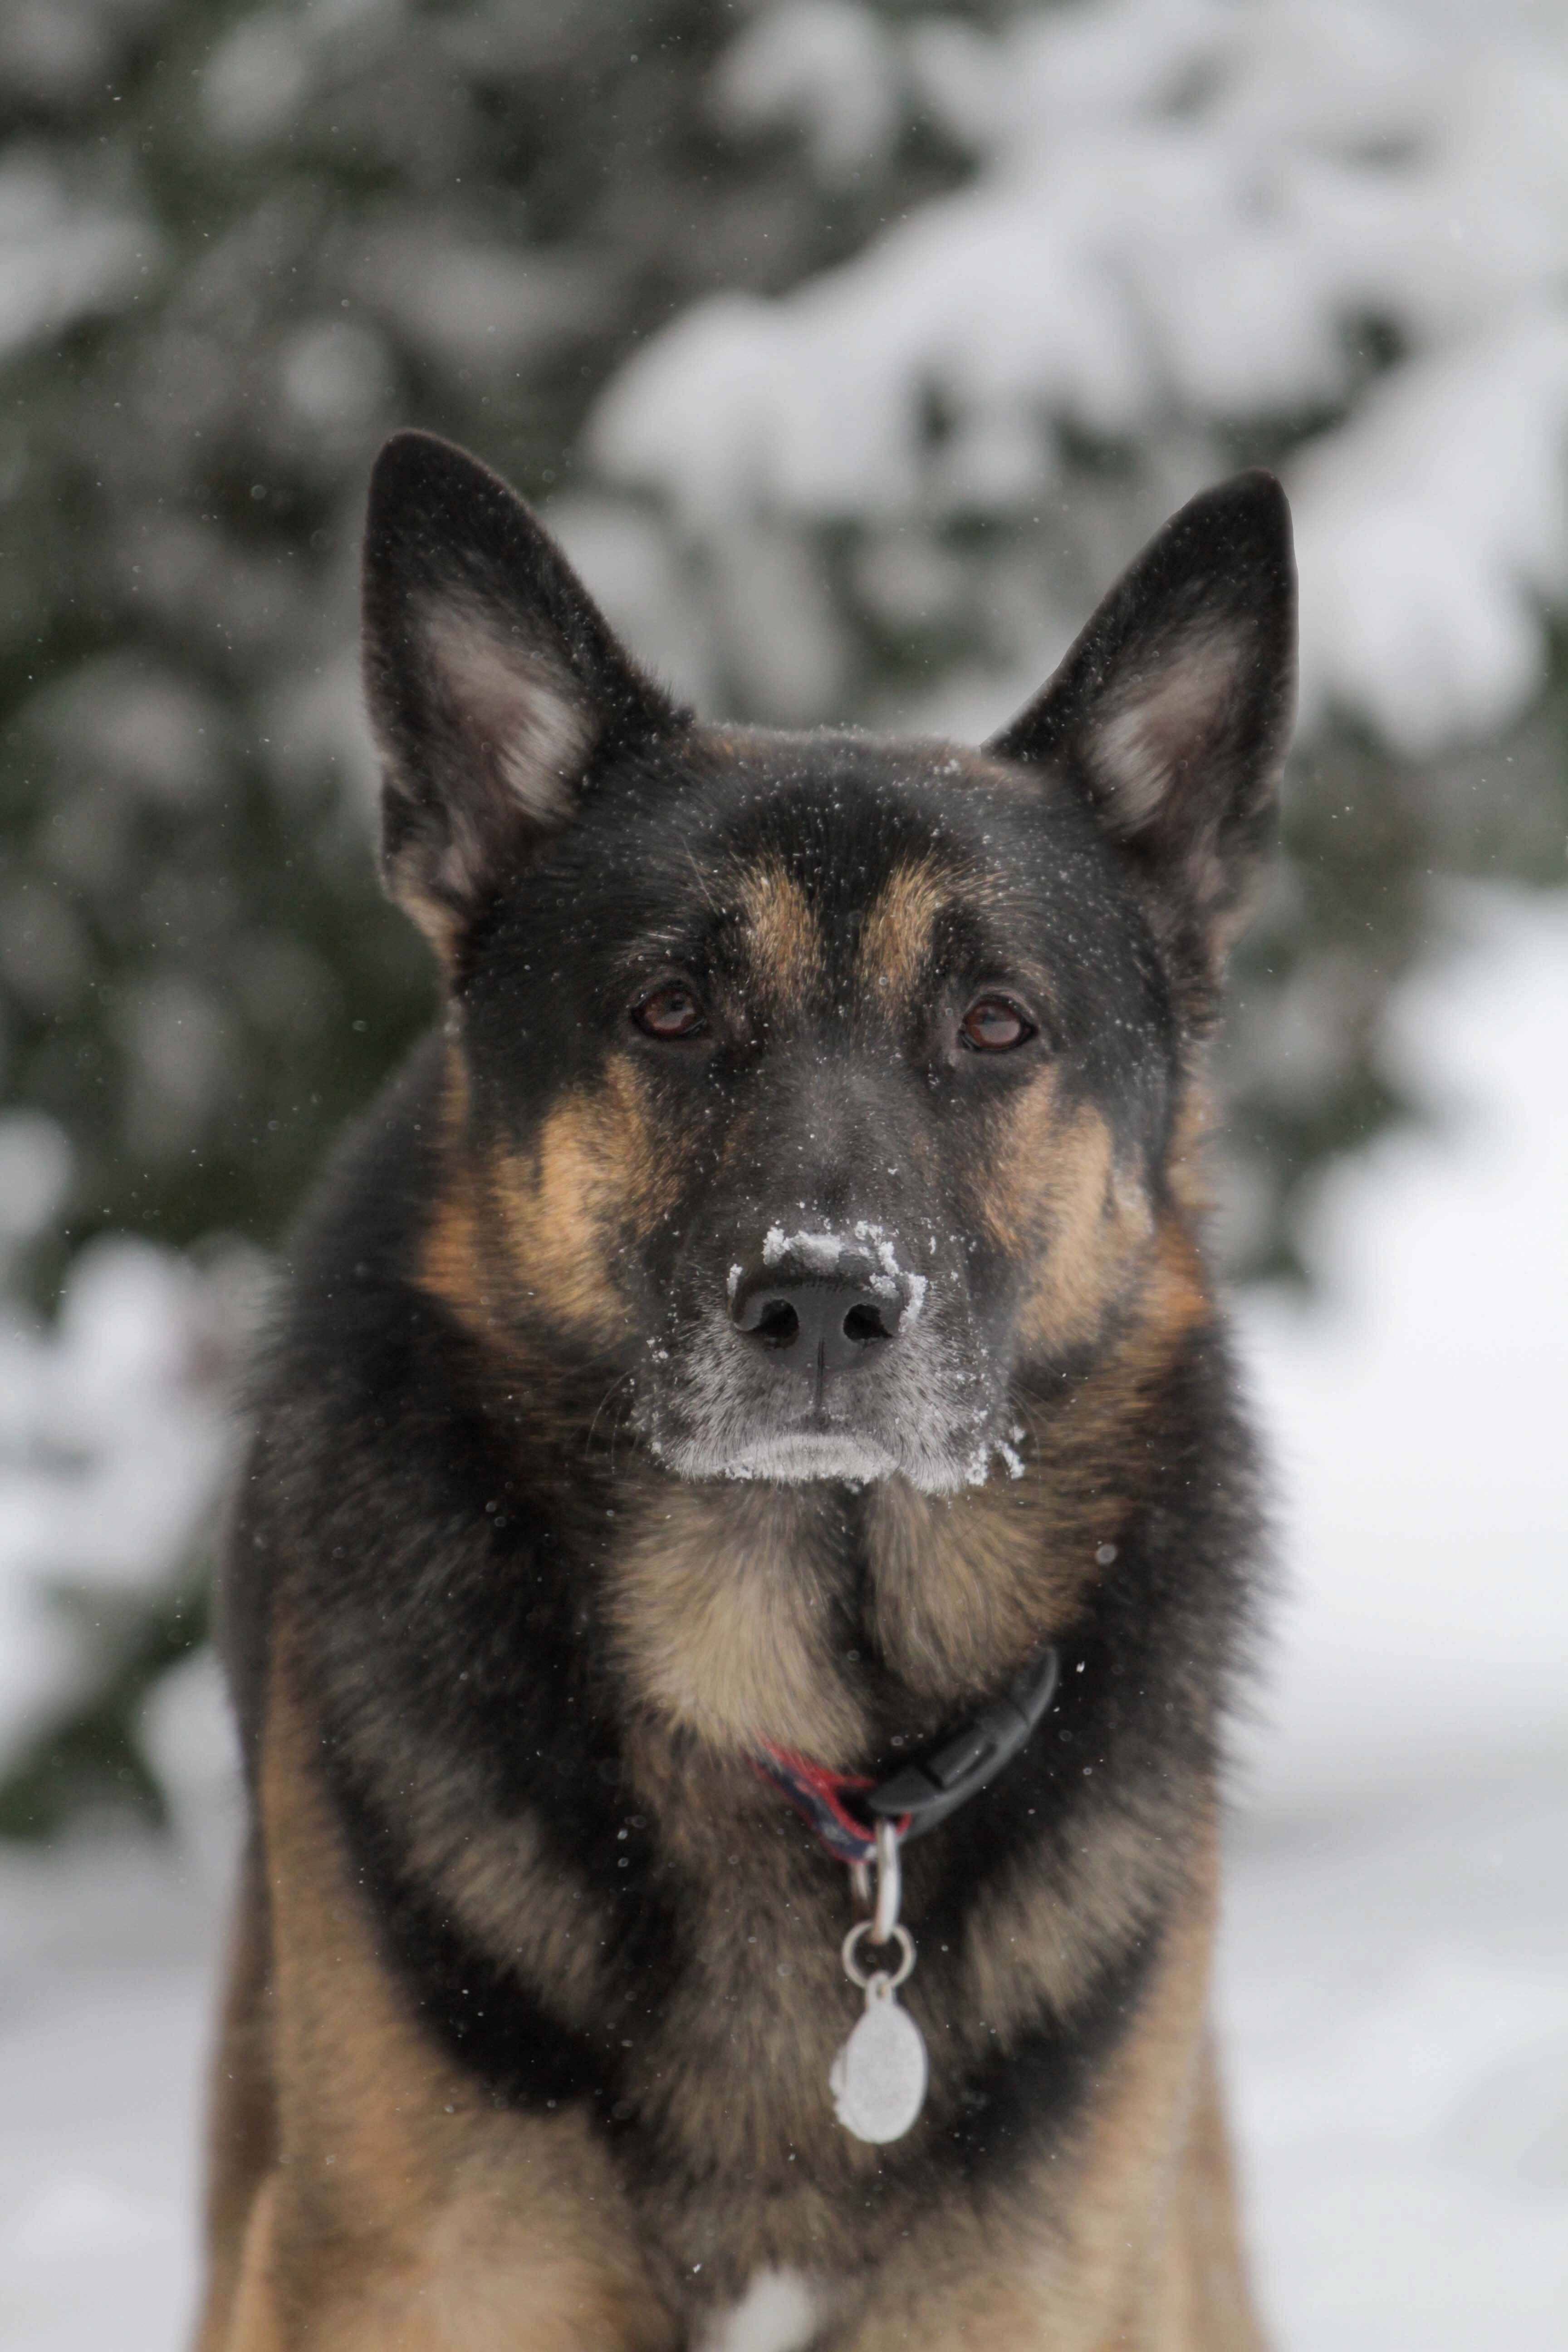 How do you handle a German Shepherd's need for outdoor play in an apartment?